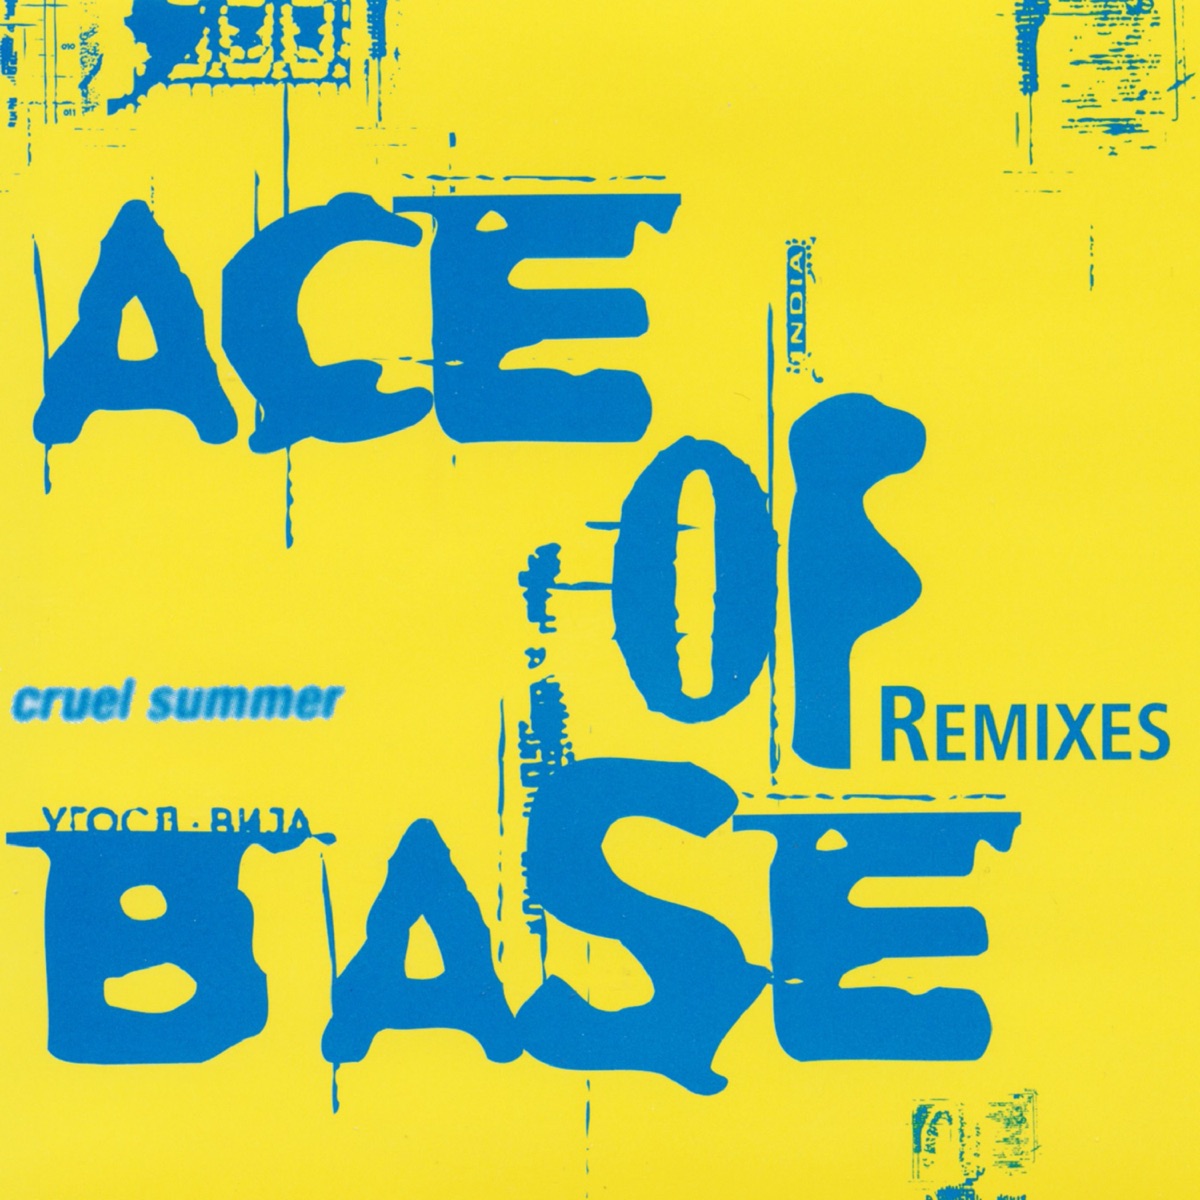 Classic Remixes (Bonus Track Edition) by Ace of Base on Apple Music